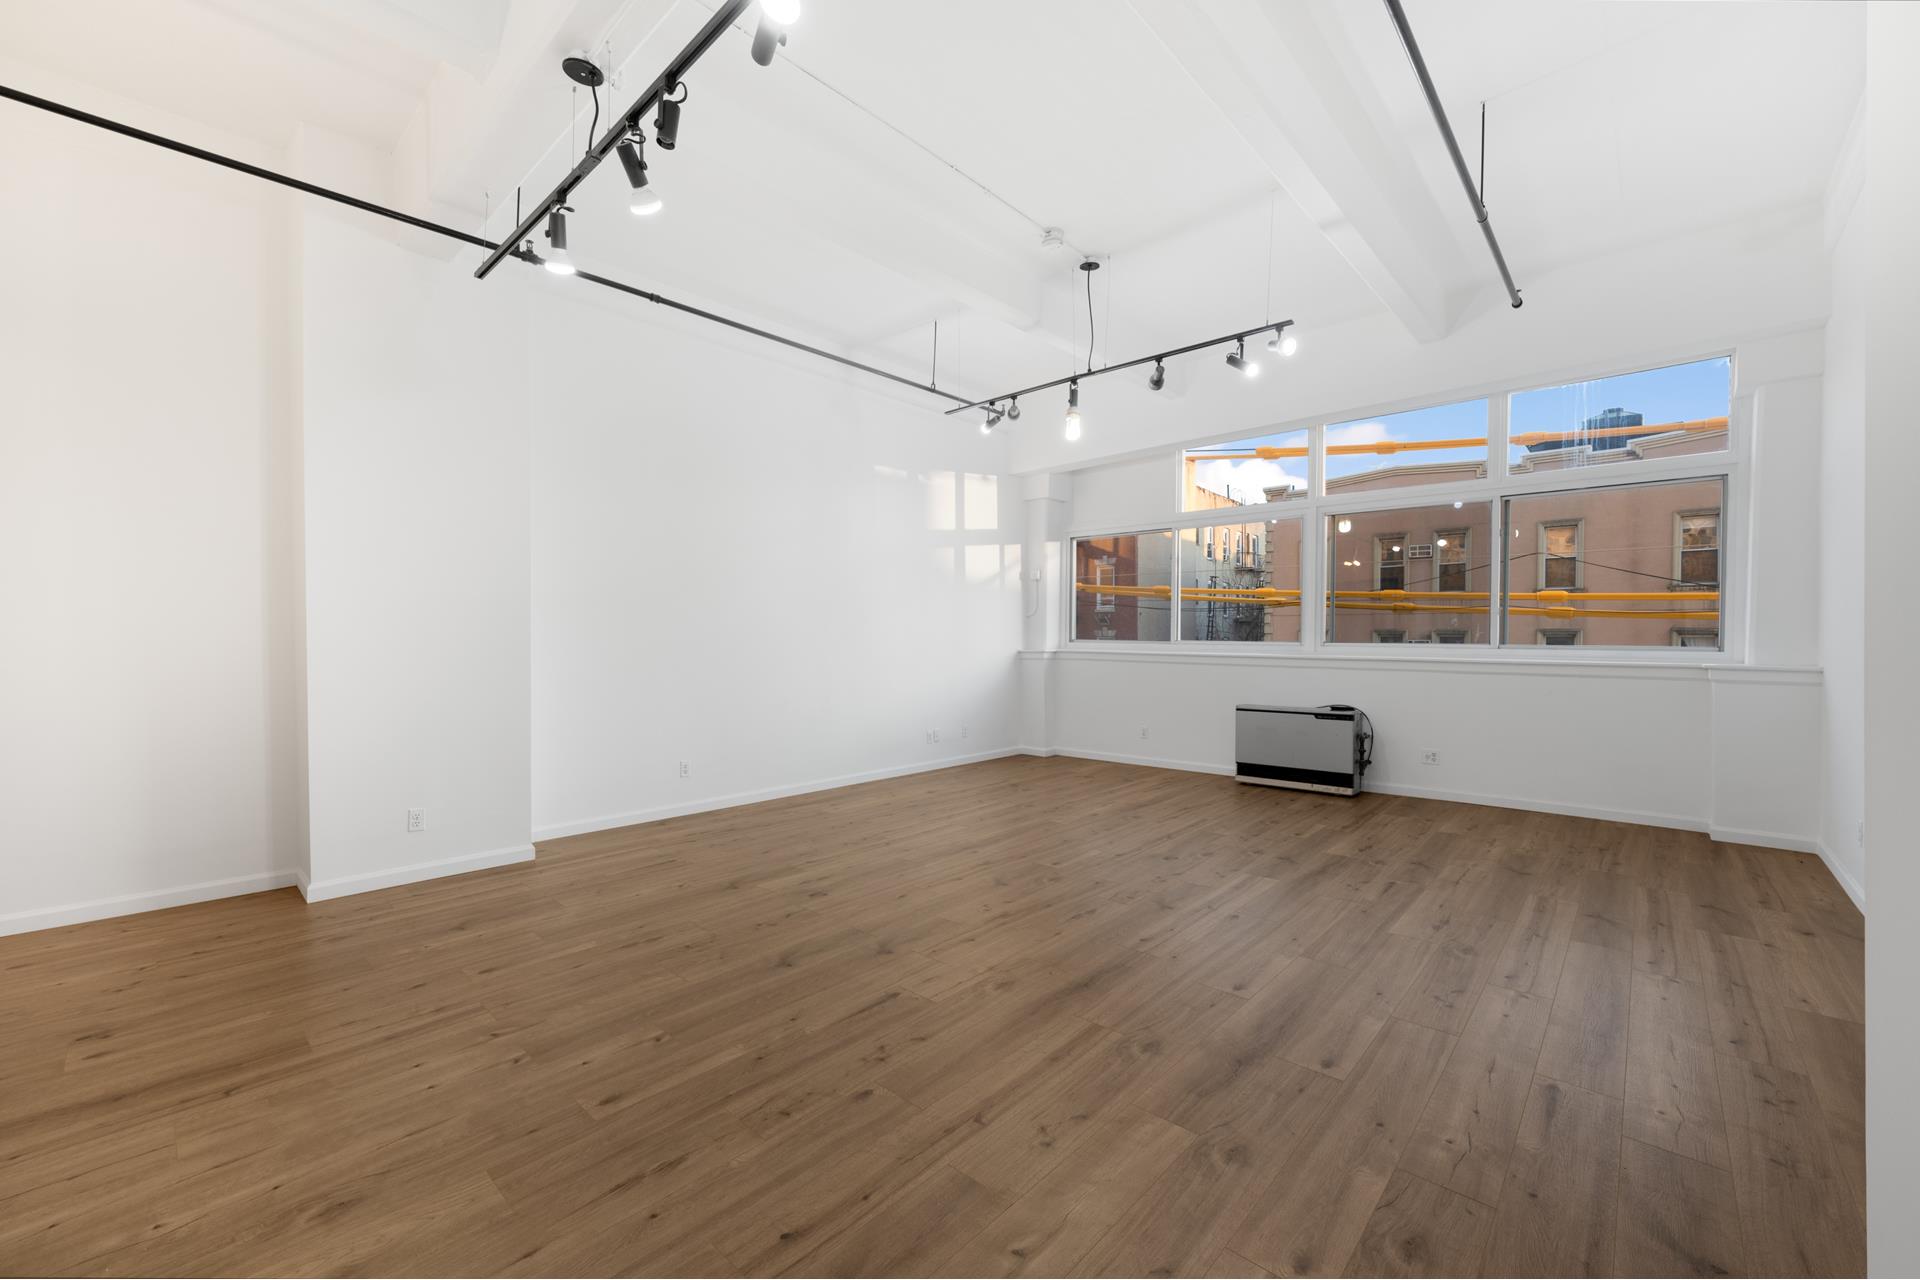 231 Norman Avenue 203, Greenpoint, Brooklyn, New York - 4 Rooms - 